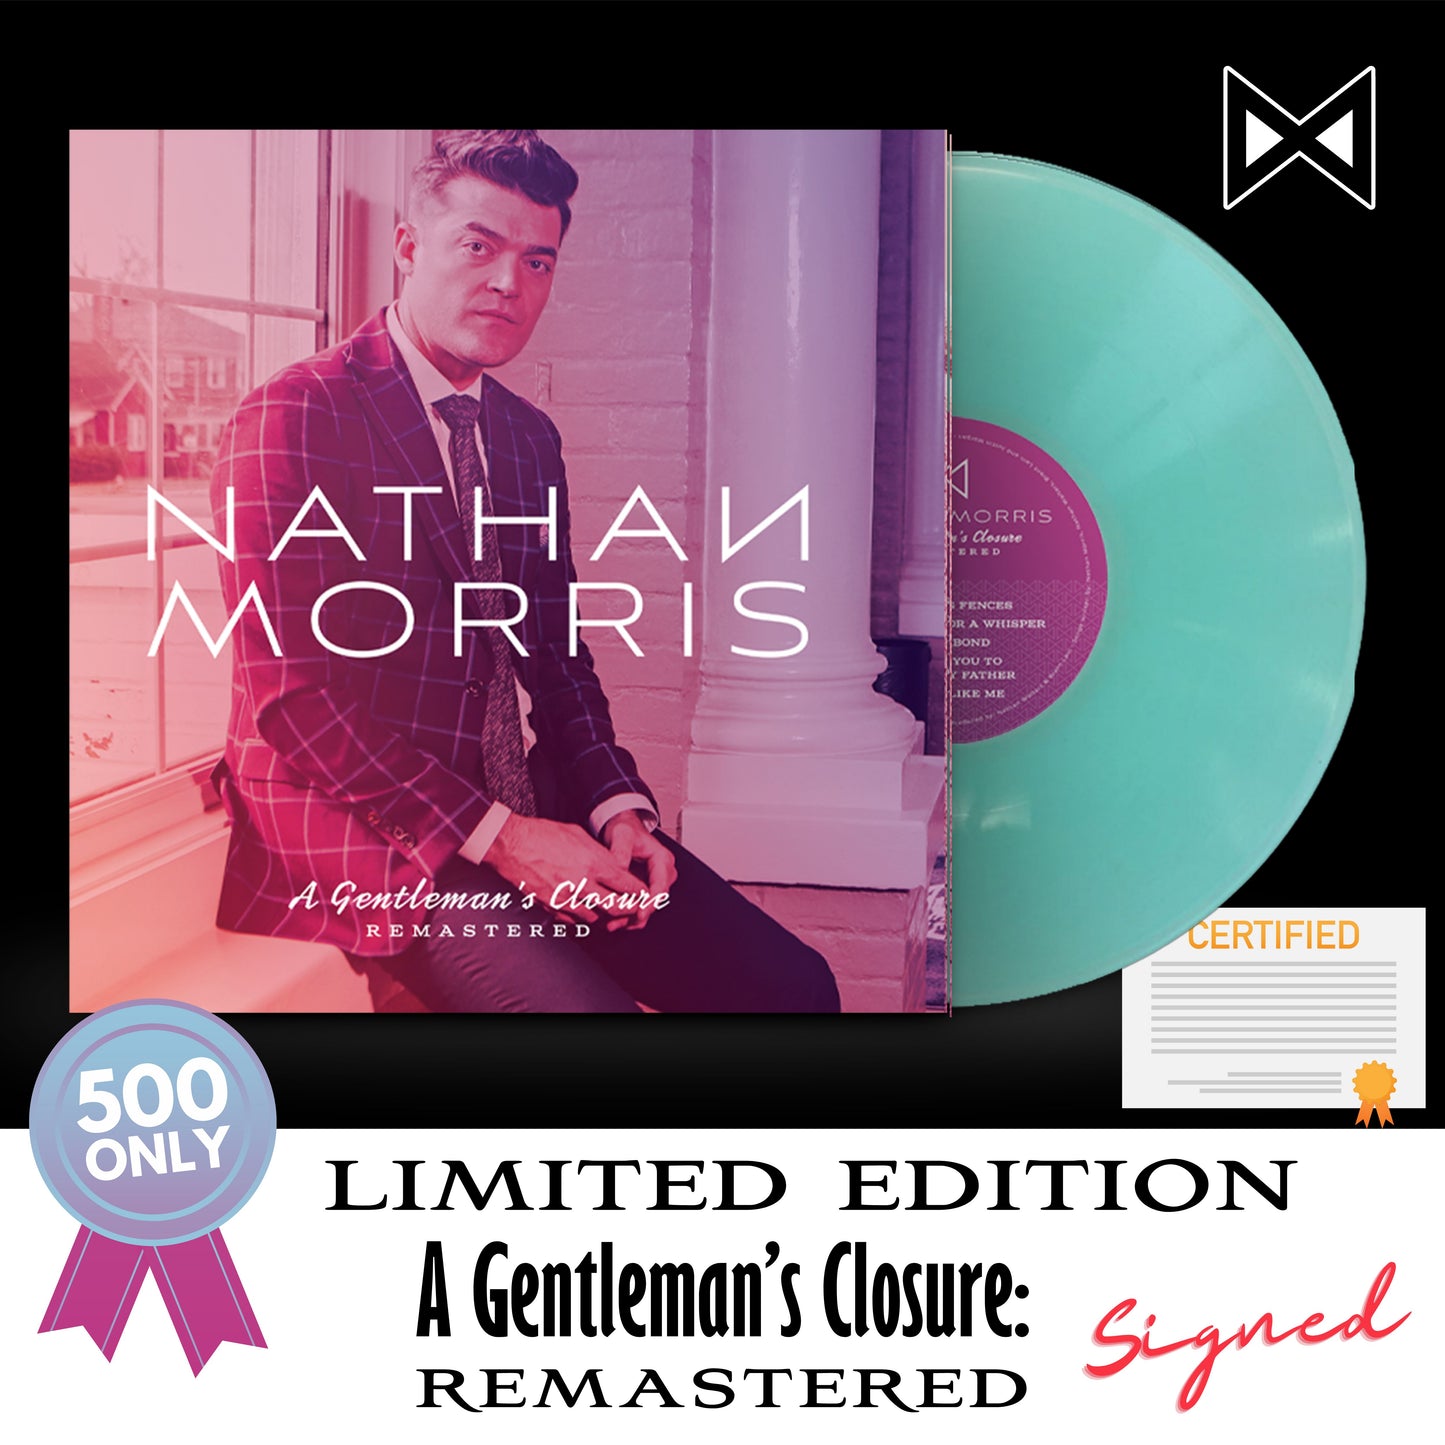 A Gentleman's Closure REMASTERED | LIMITED EDITION Teal Vinyl Record | Only 500, Signed by Nathan